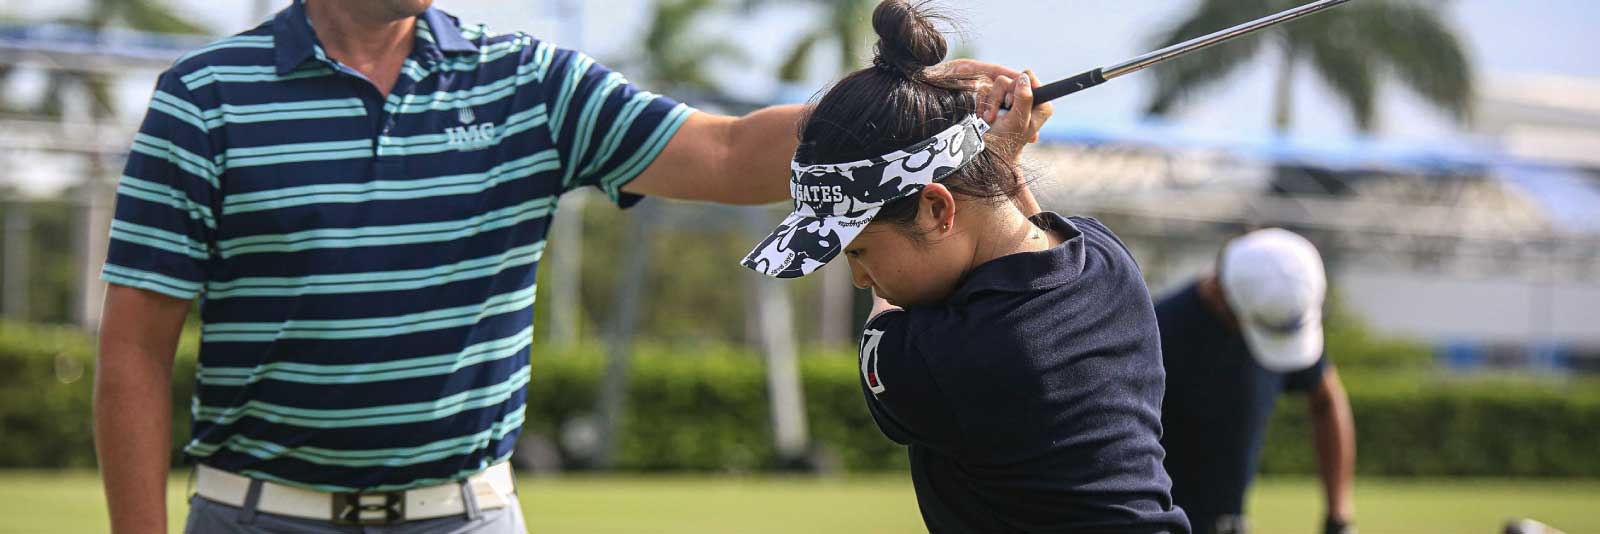 women's golf athlete and coach